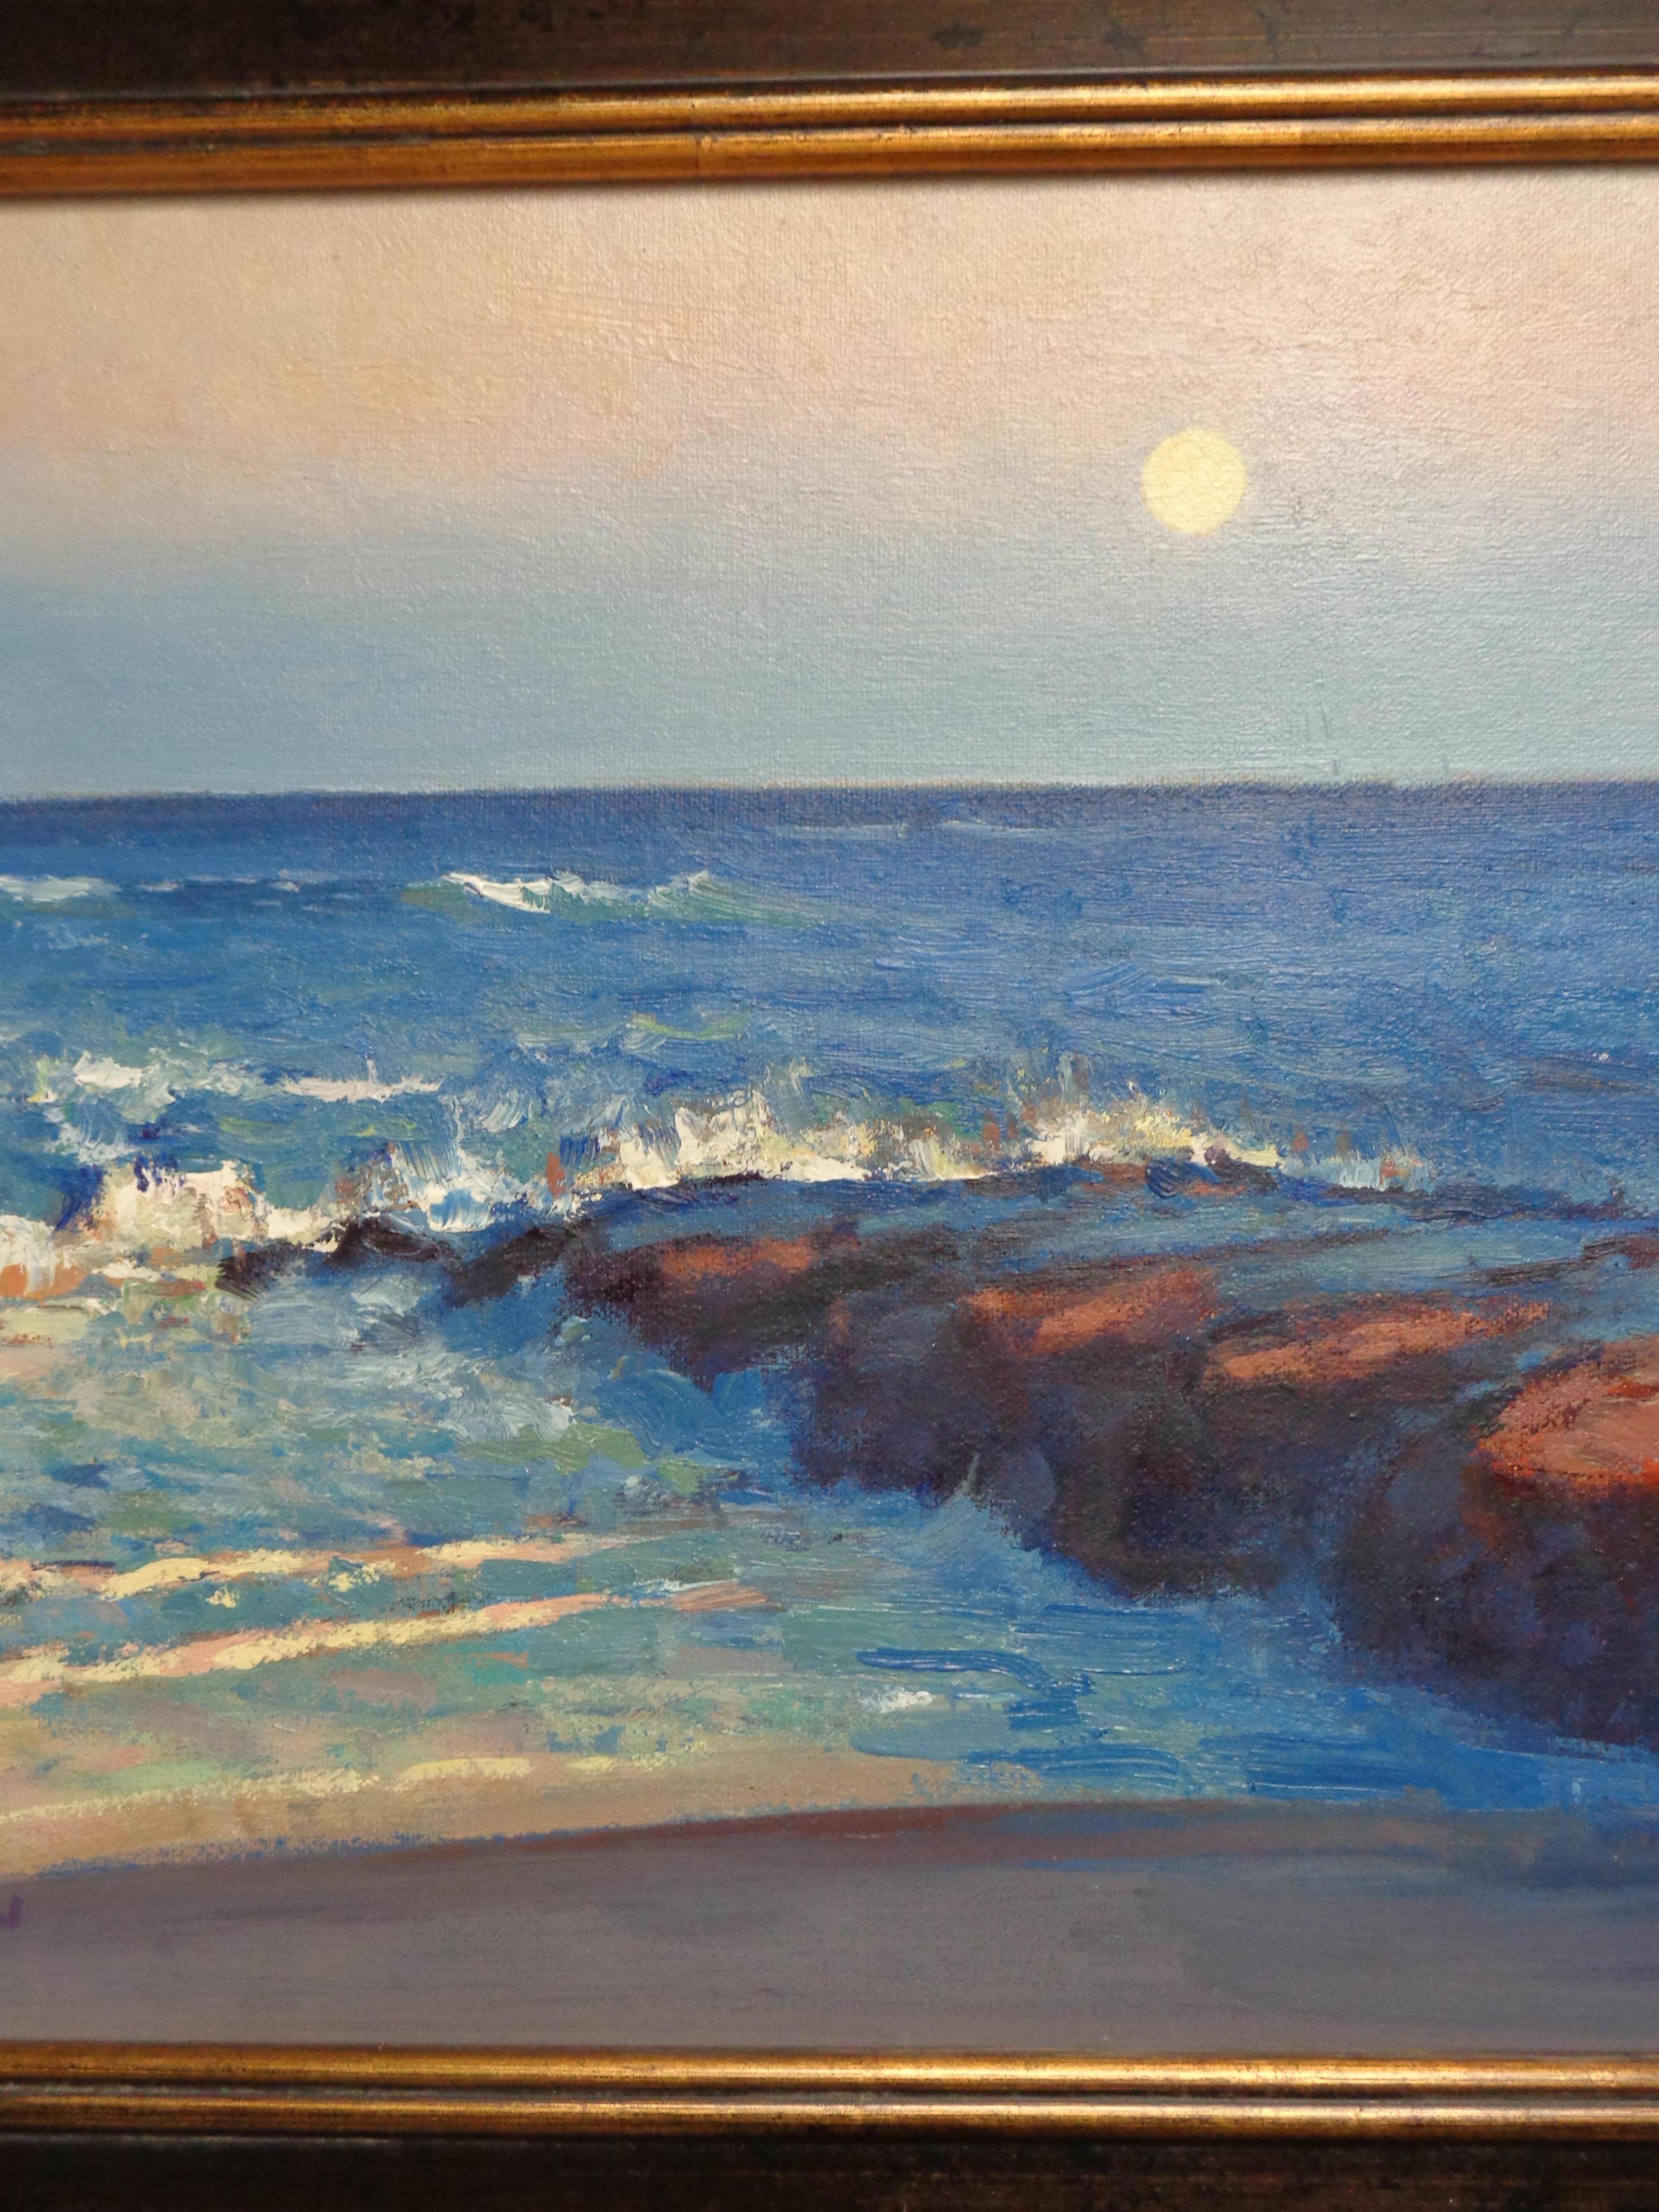  Impressionistic Moonlight Seascape Oil Painting Michael Budden Beach Jetty For Sale 3